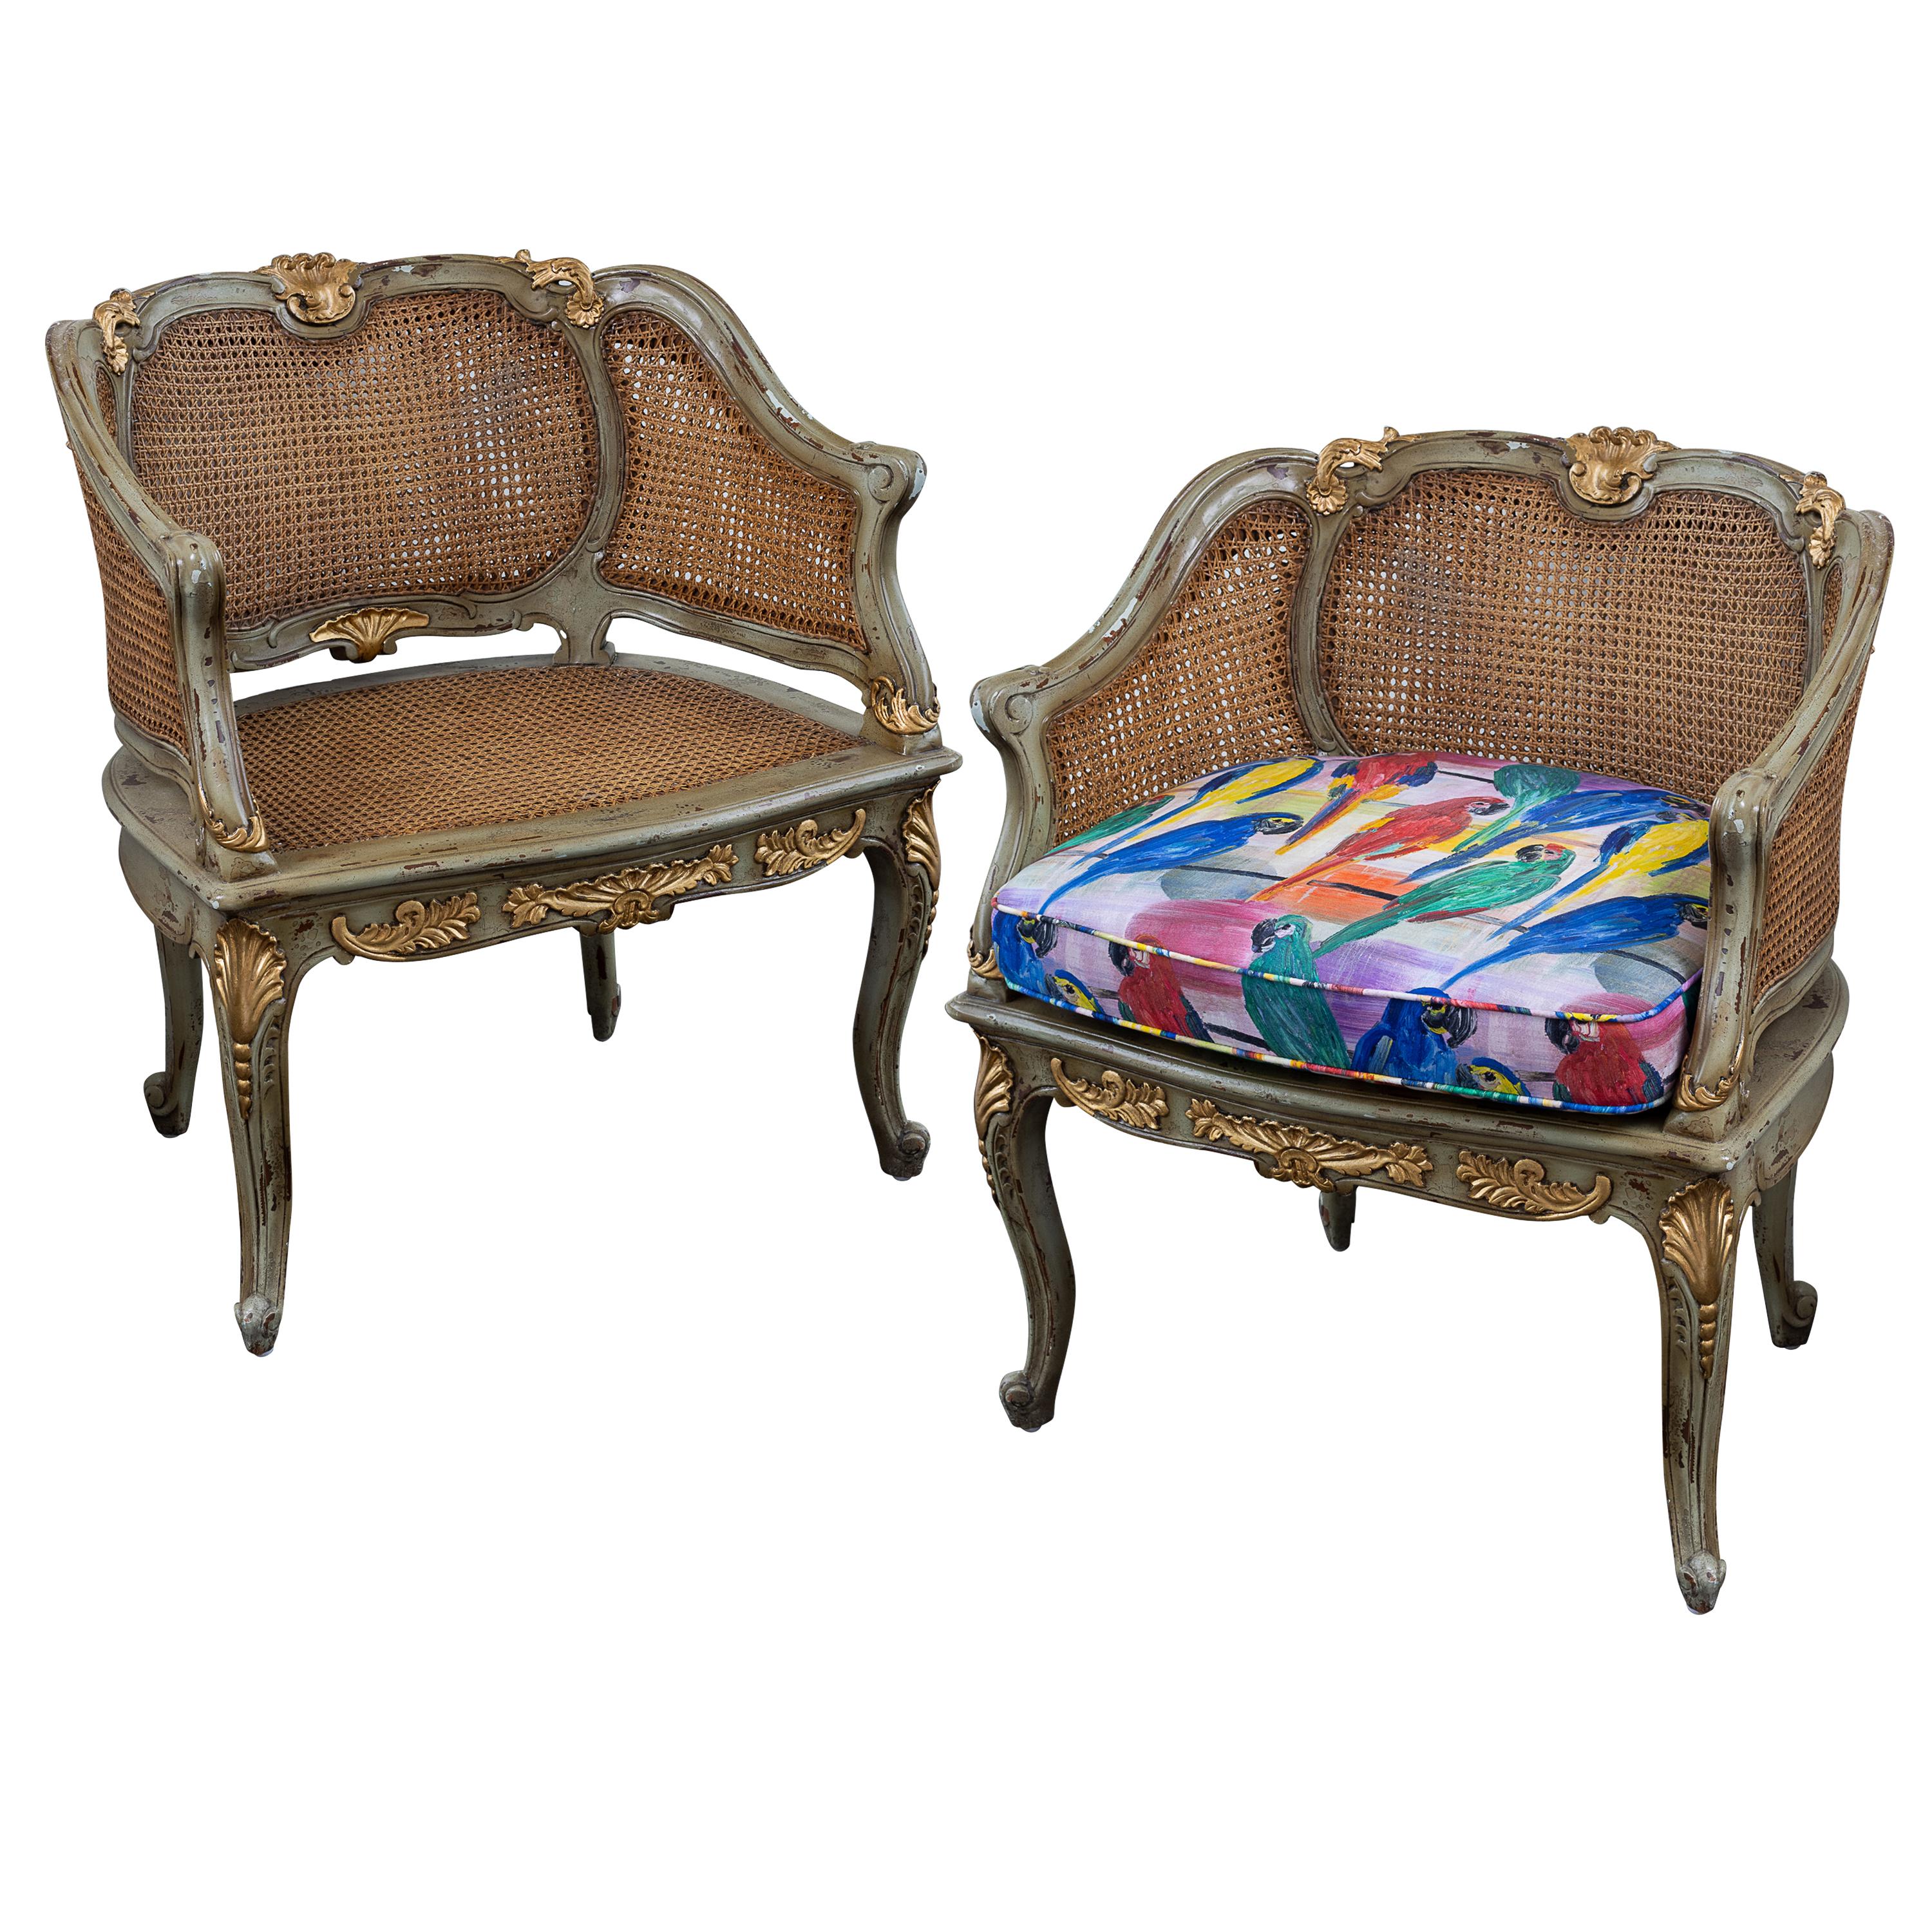 Pair of early 19th century Louis XV style French Bergere chairs with caned back and seat. Hand painted wood with gold leaf carvings. Seat cushion in Hunt Slonem's Hunt's Parrots Print. Chairs can be sold separately. Without cushion seat height